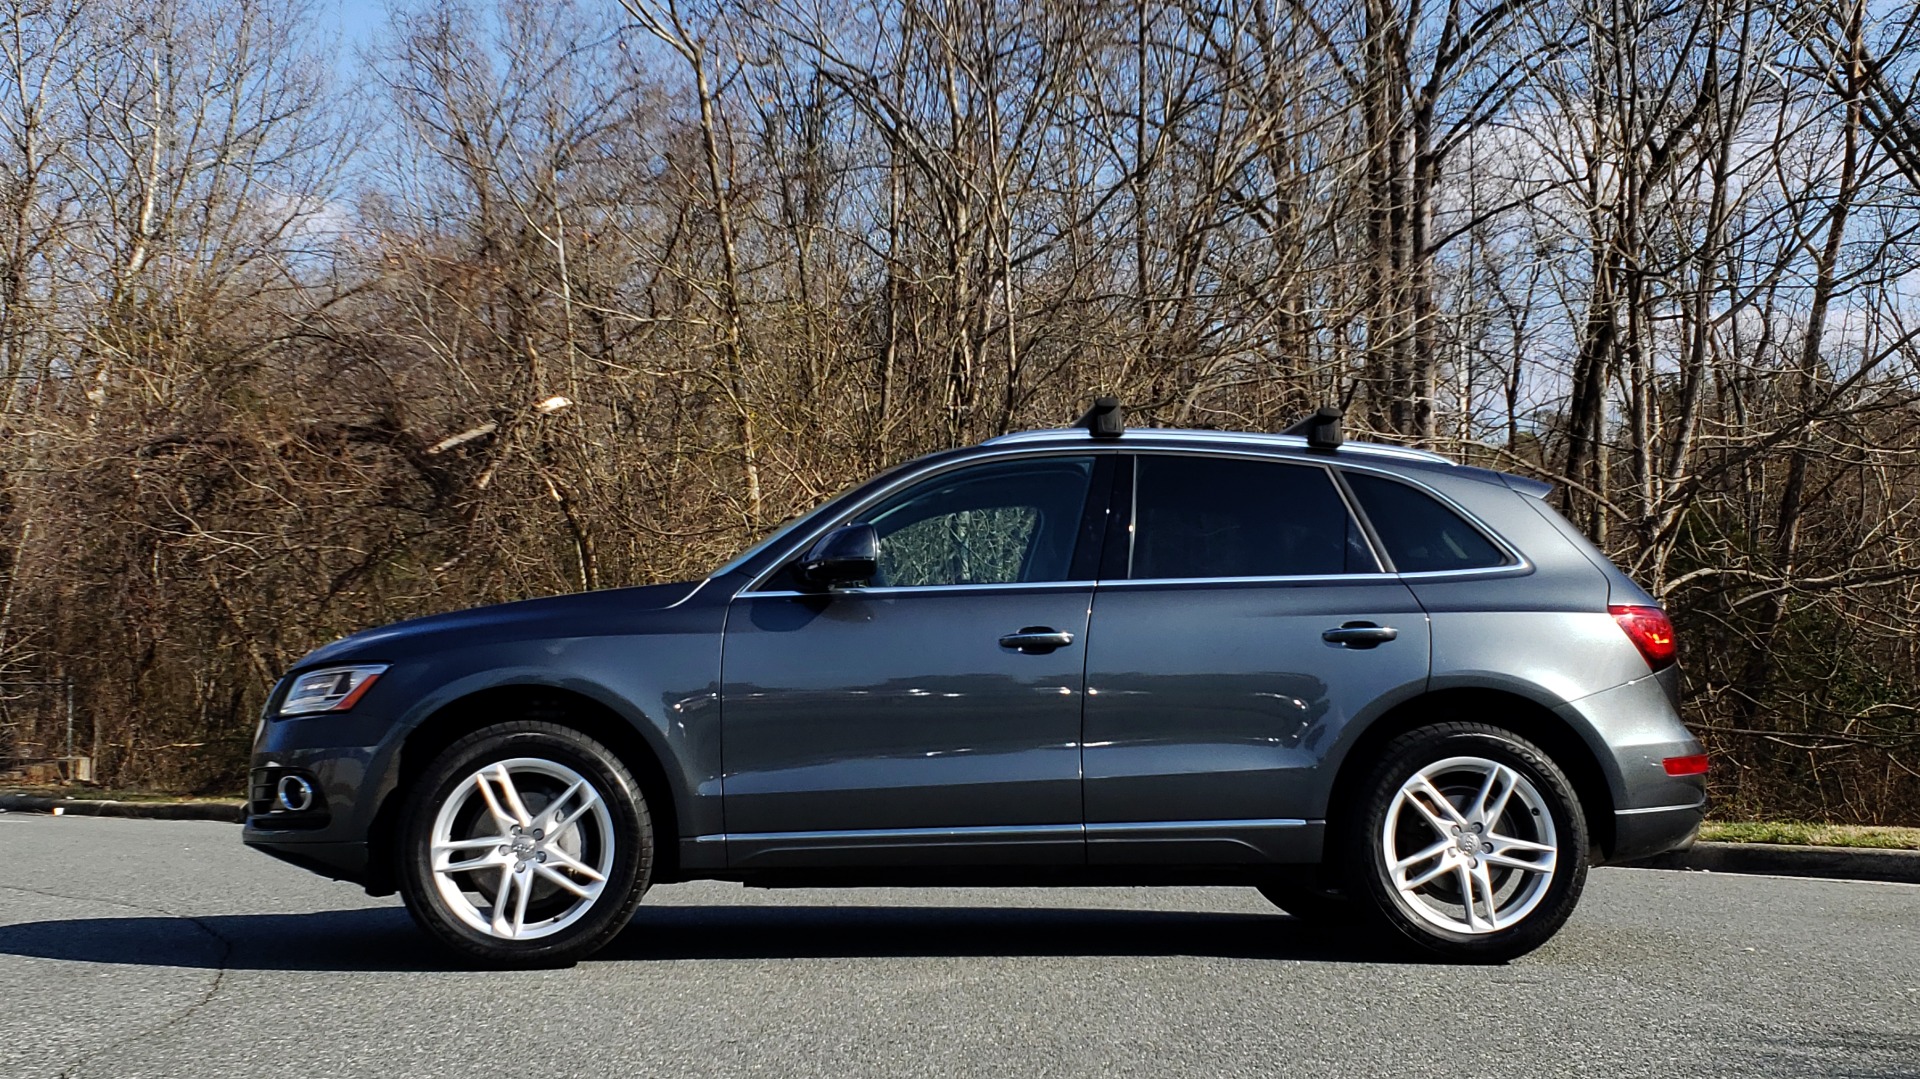 Used 2017 Audi Q5 PREMIUM PLUS / TECH / NAV / PANO / REARVIEW / B&O SND for sale Sold at Formula Imports in Charlotte NC 28227 2